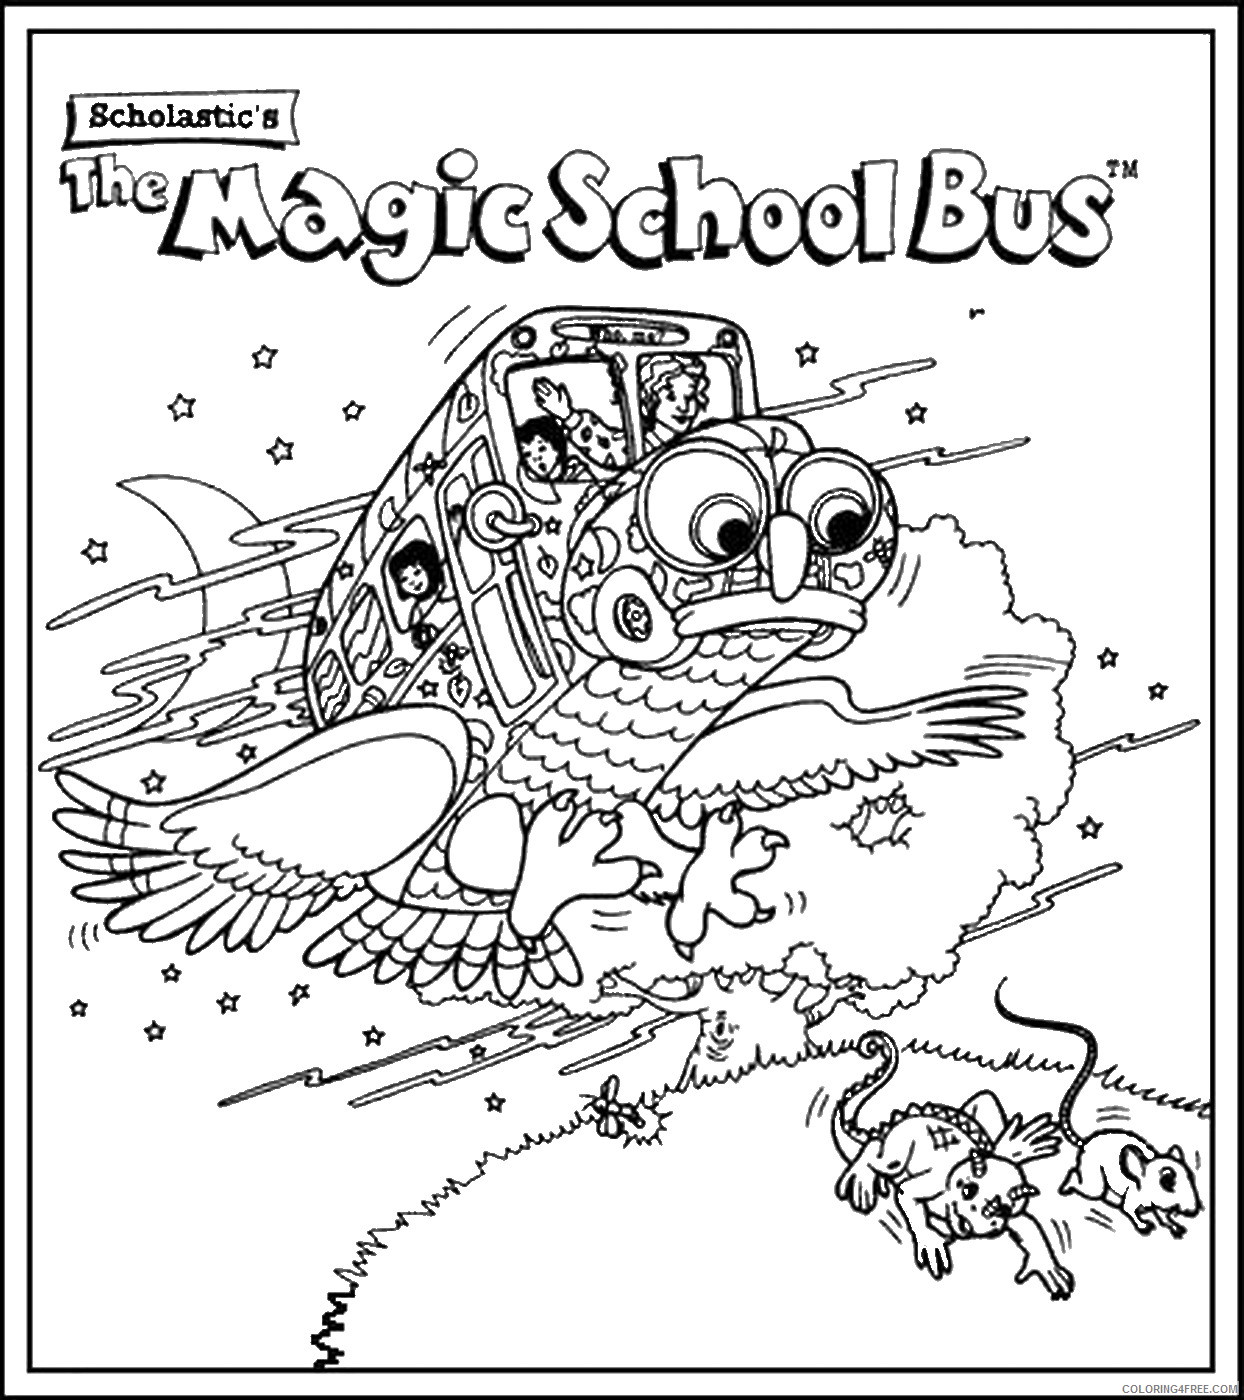 The Magic School Bus Coloring Pages Cartoons magic_school_bus_cl03 Printable 2020 6475 Coloring4free